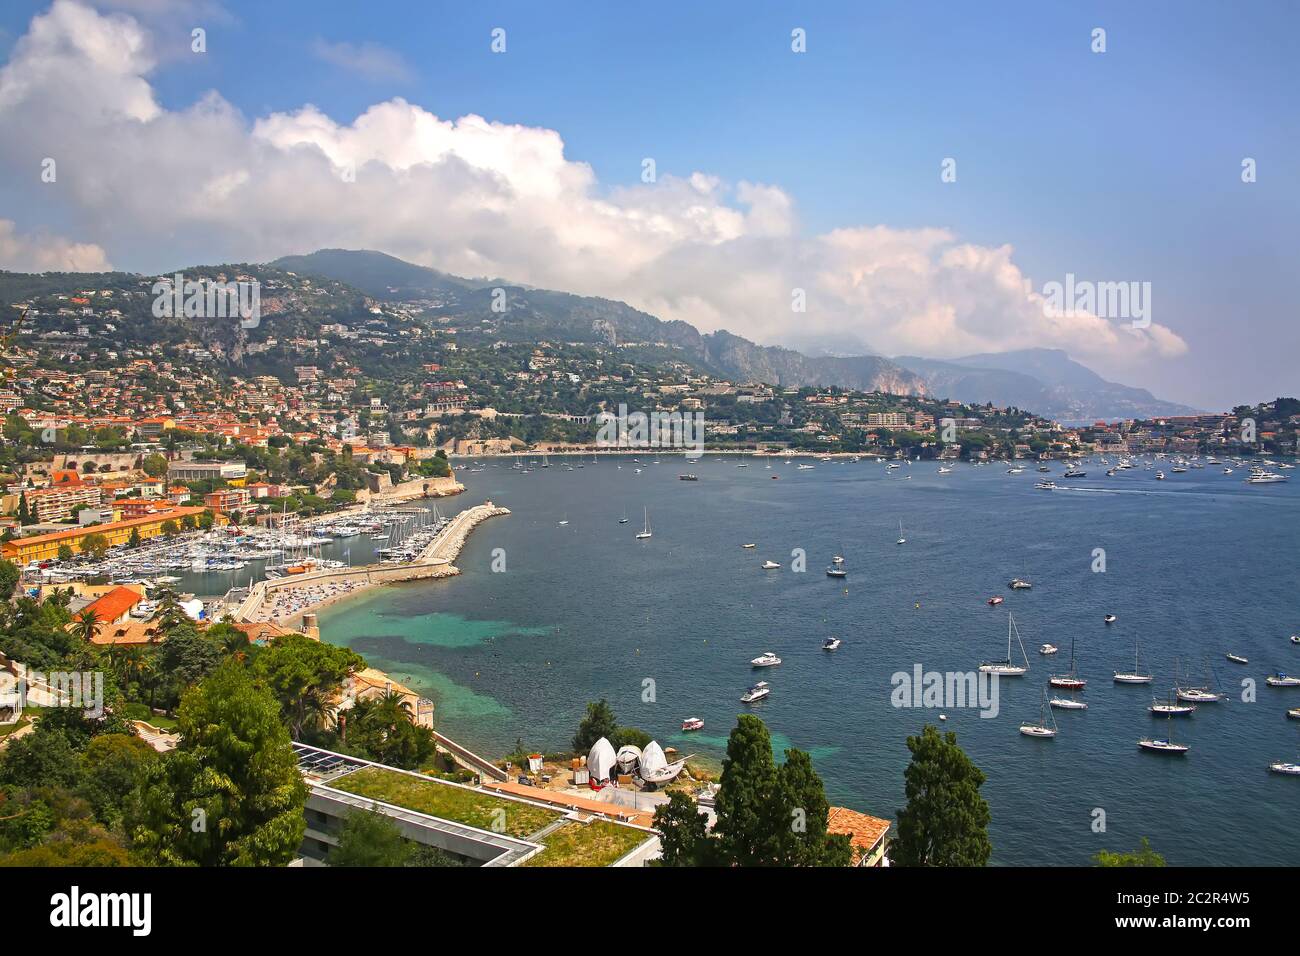 Beautiful view of the French riverira town of Villefranche sur Mer, on the coastline of the mediteranean sea, with a marina, tourist resort, France. Stock Photo